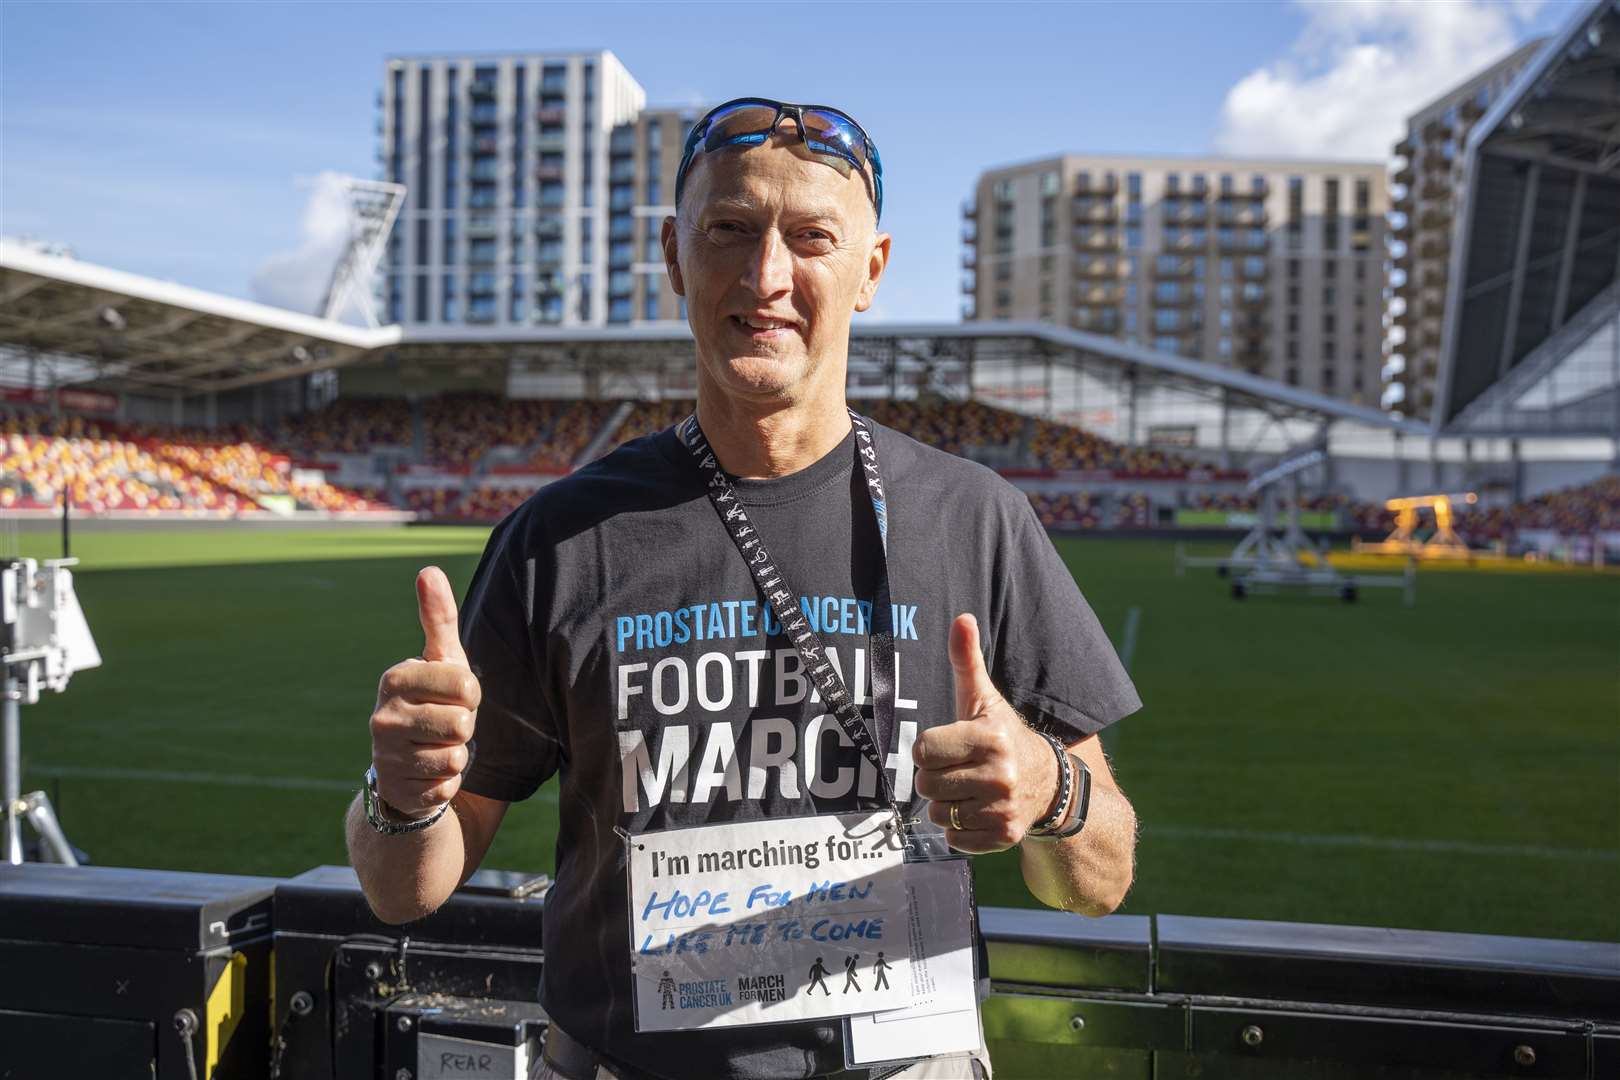 Paul Dennington at Jeff Stelling’s football march in London (Rosie Lonsdale/Prostate Cancer UK)